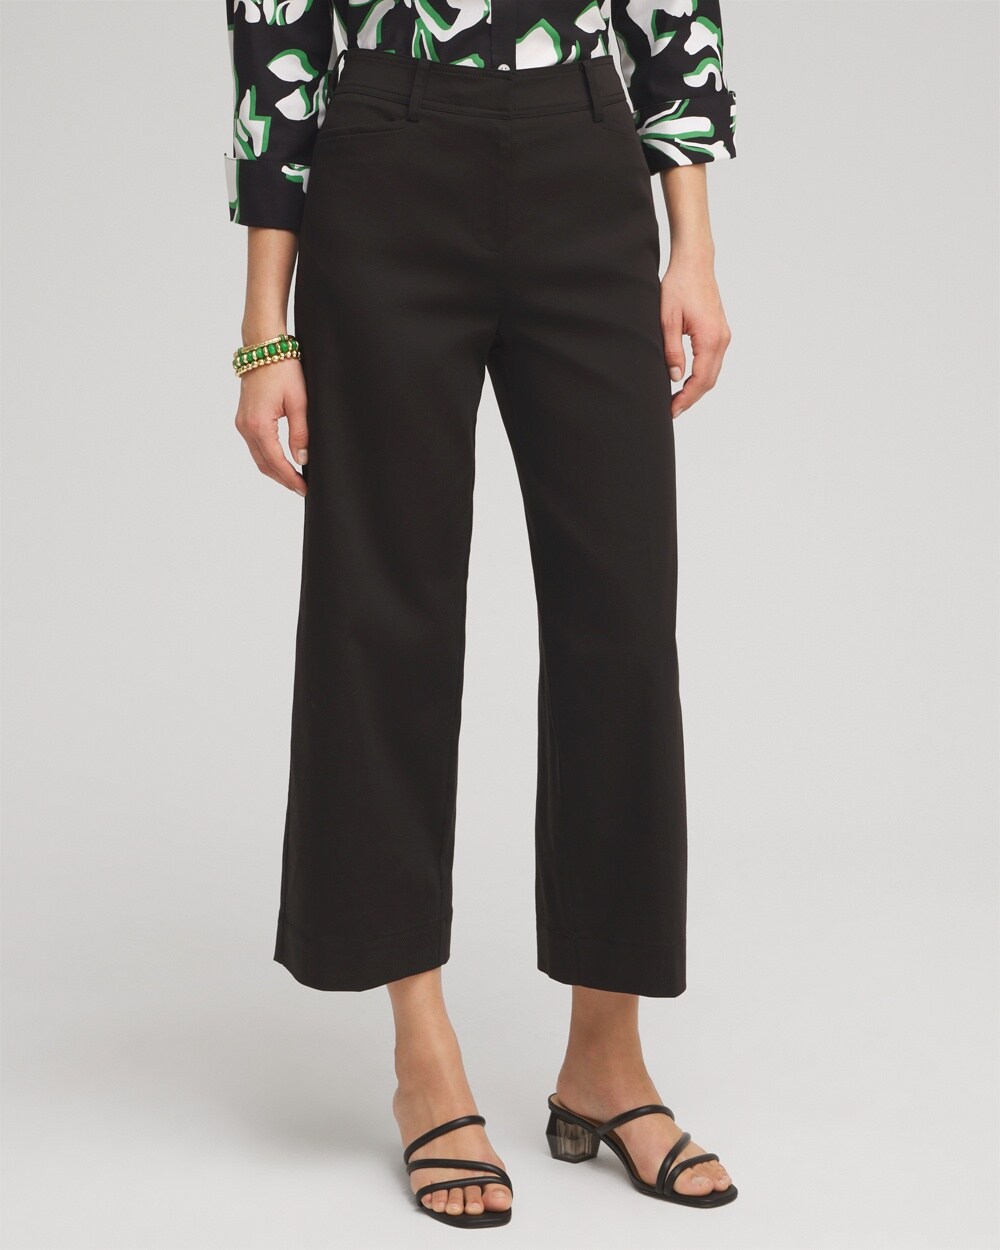 Cotton Sateen Cropped Pants